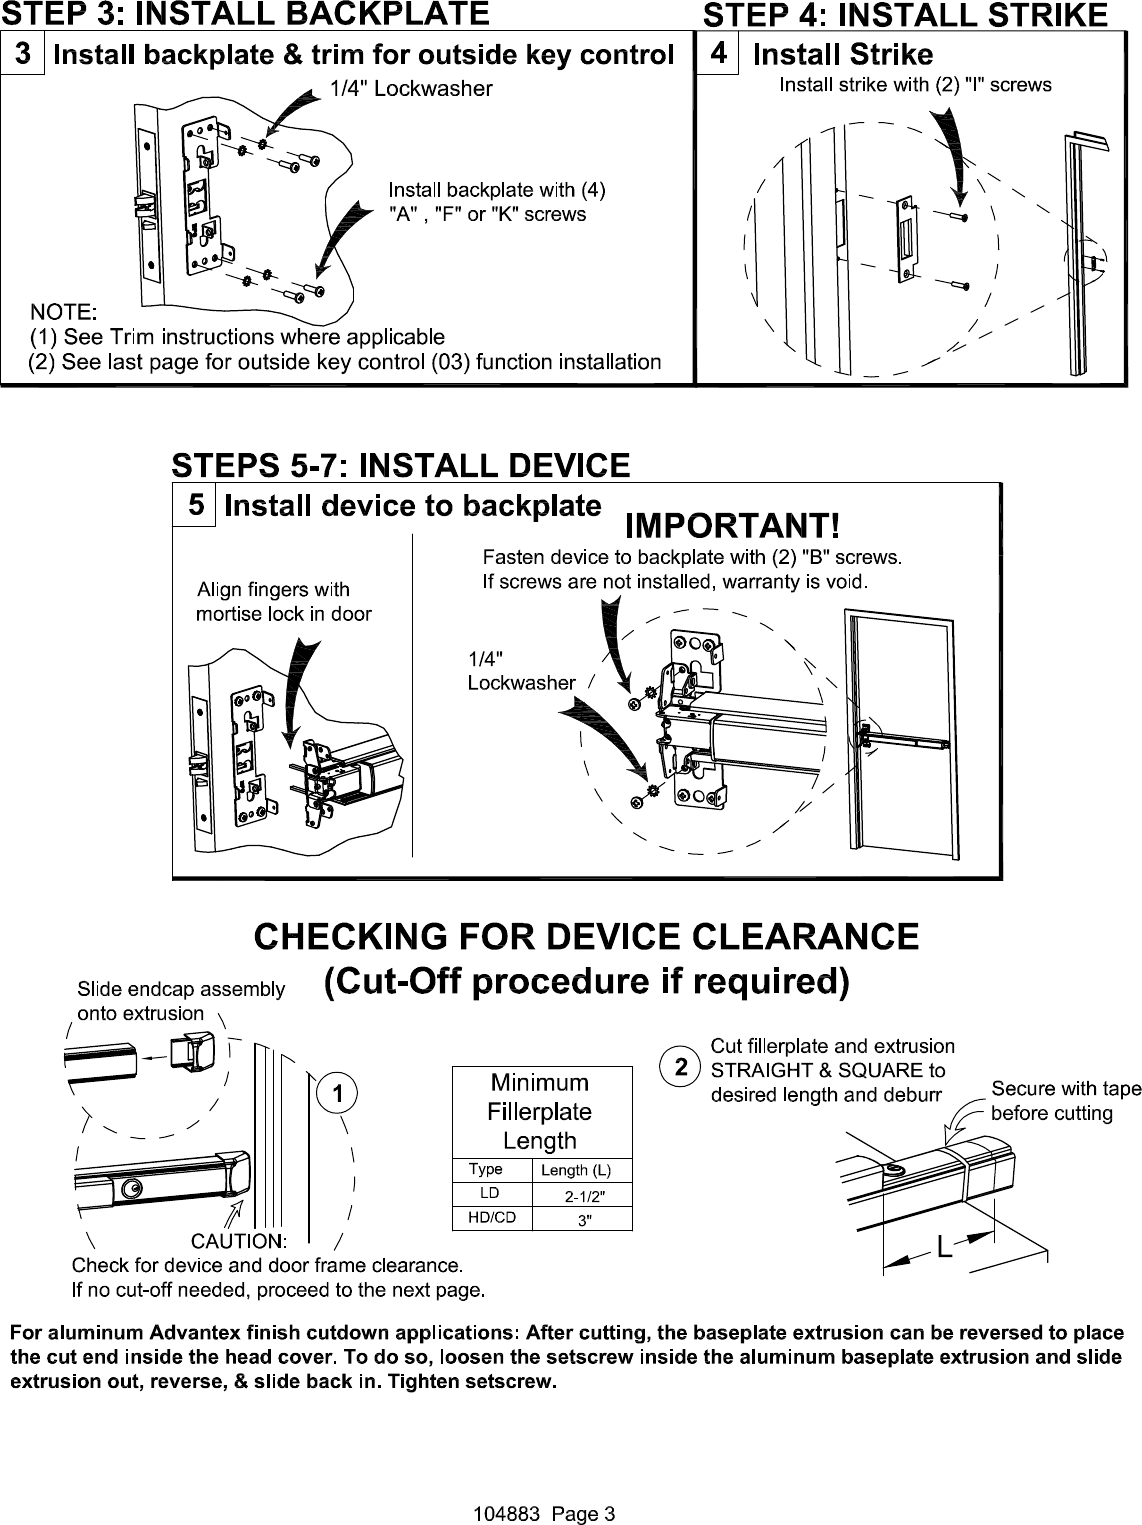 Page 3 of 4 - Detex R Installation Instructions For Advantex Mortise Lock 30/F30 Series Device And W S 104883